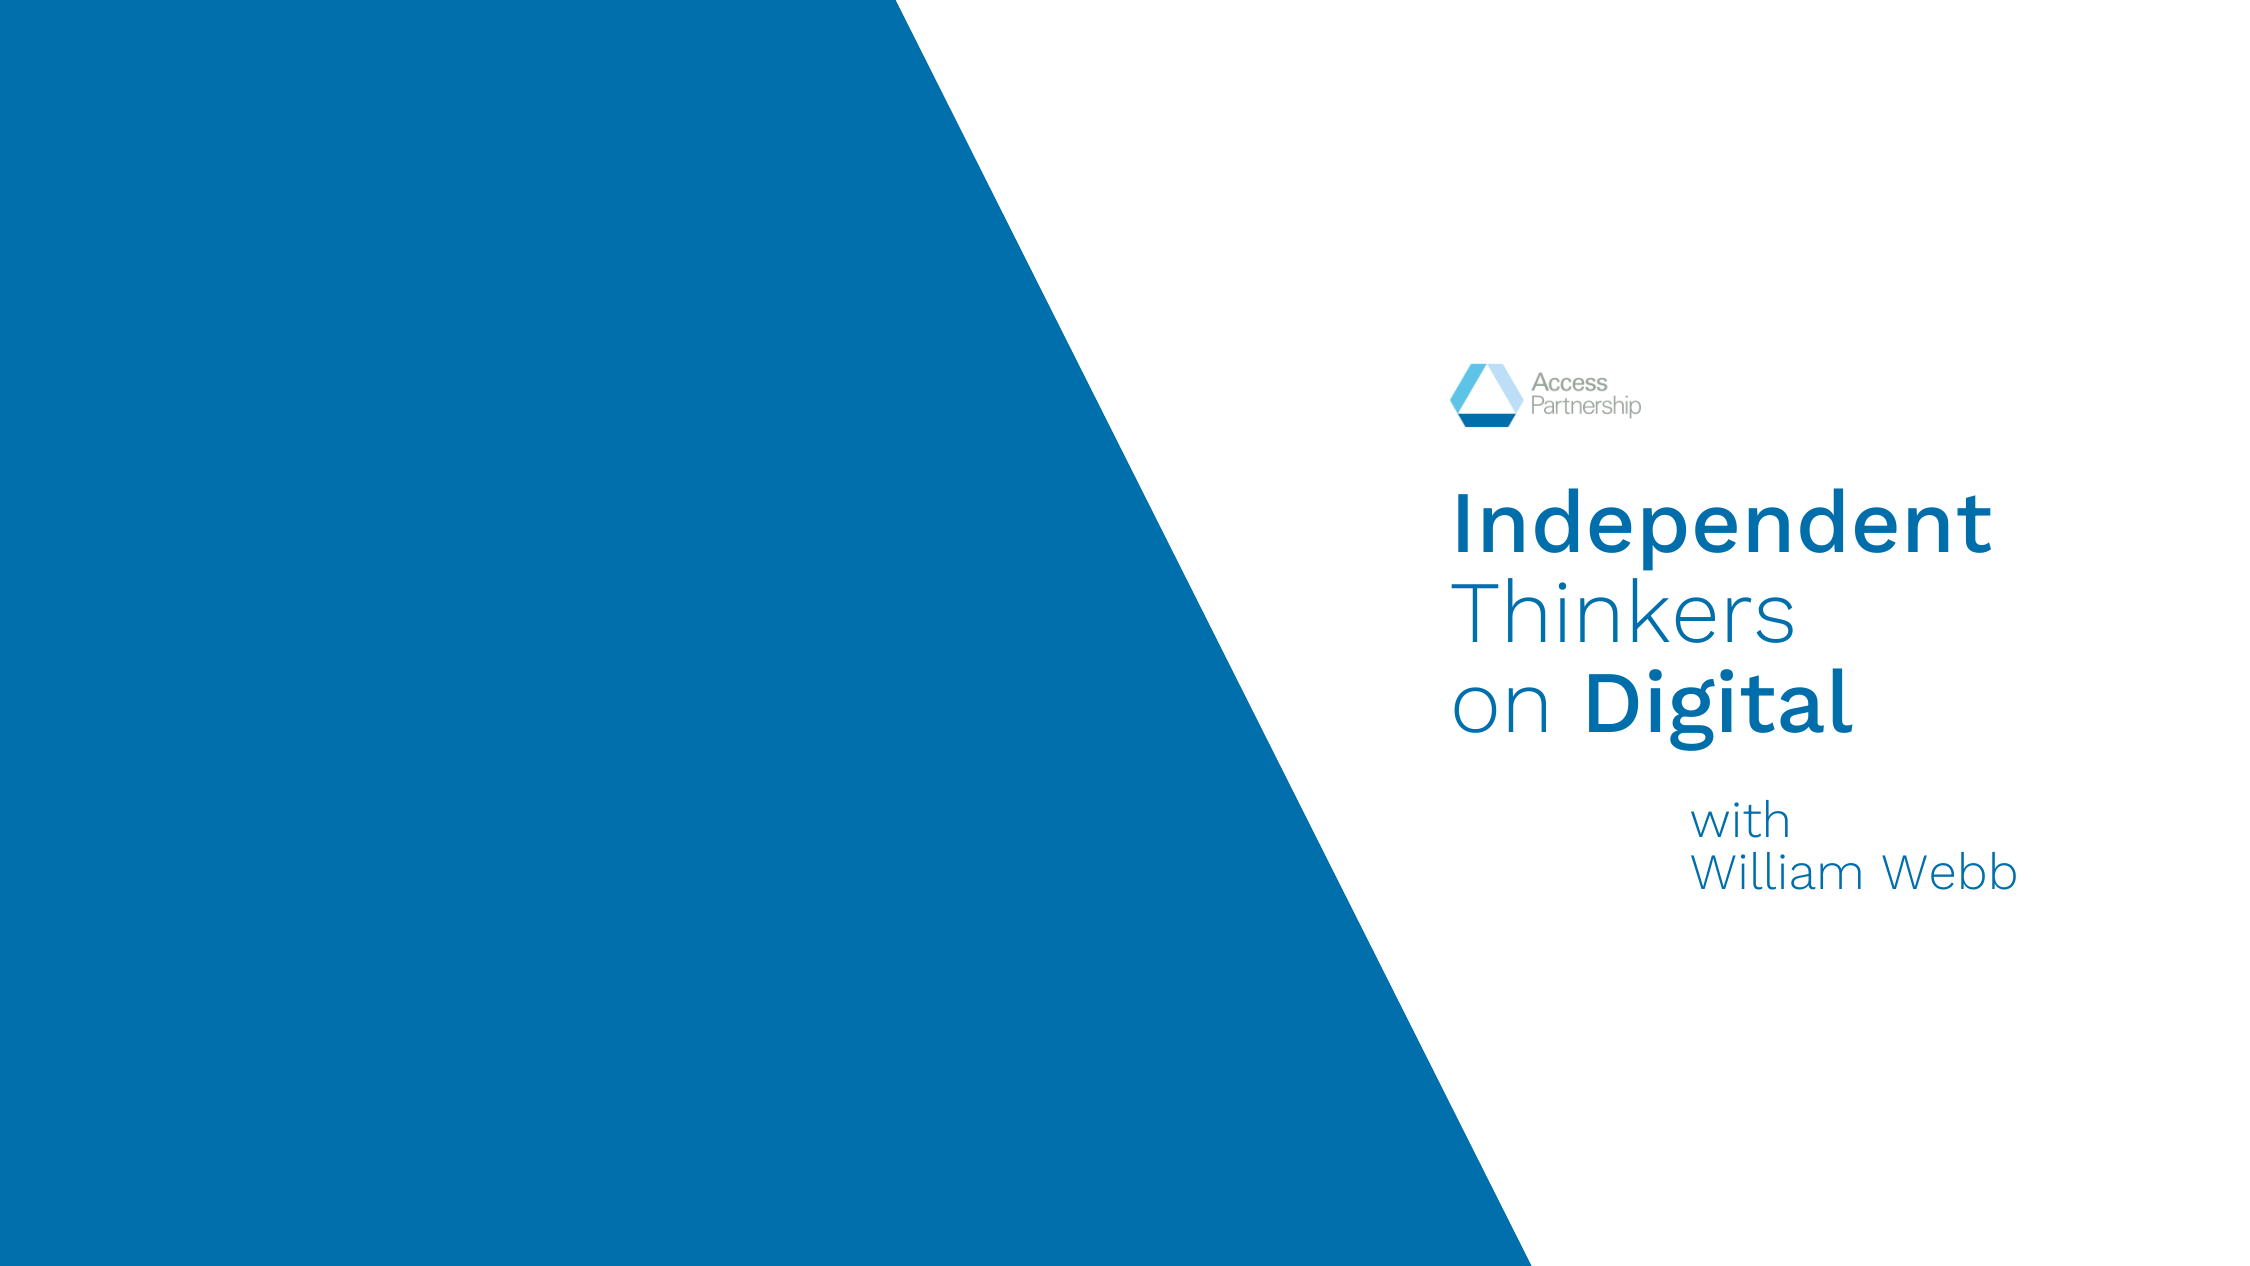 Independent Thinkers on Digital